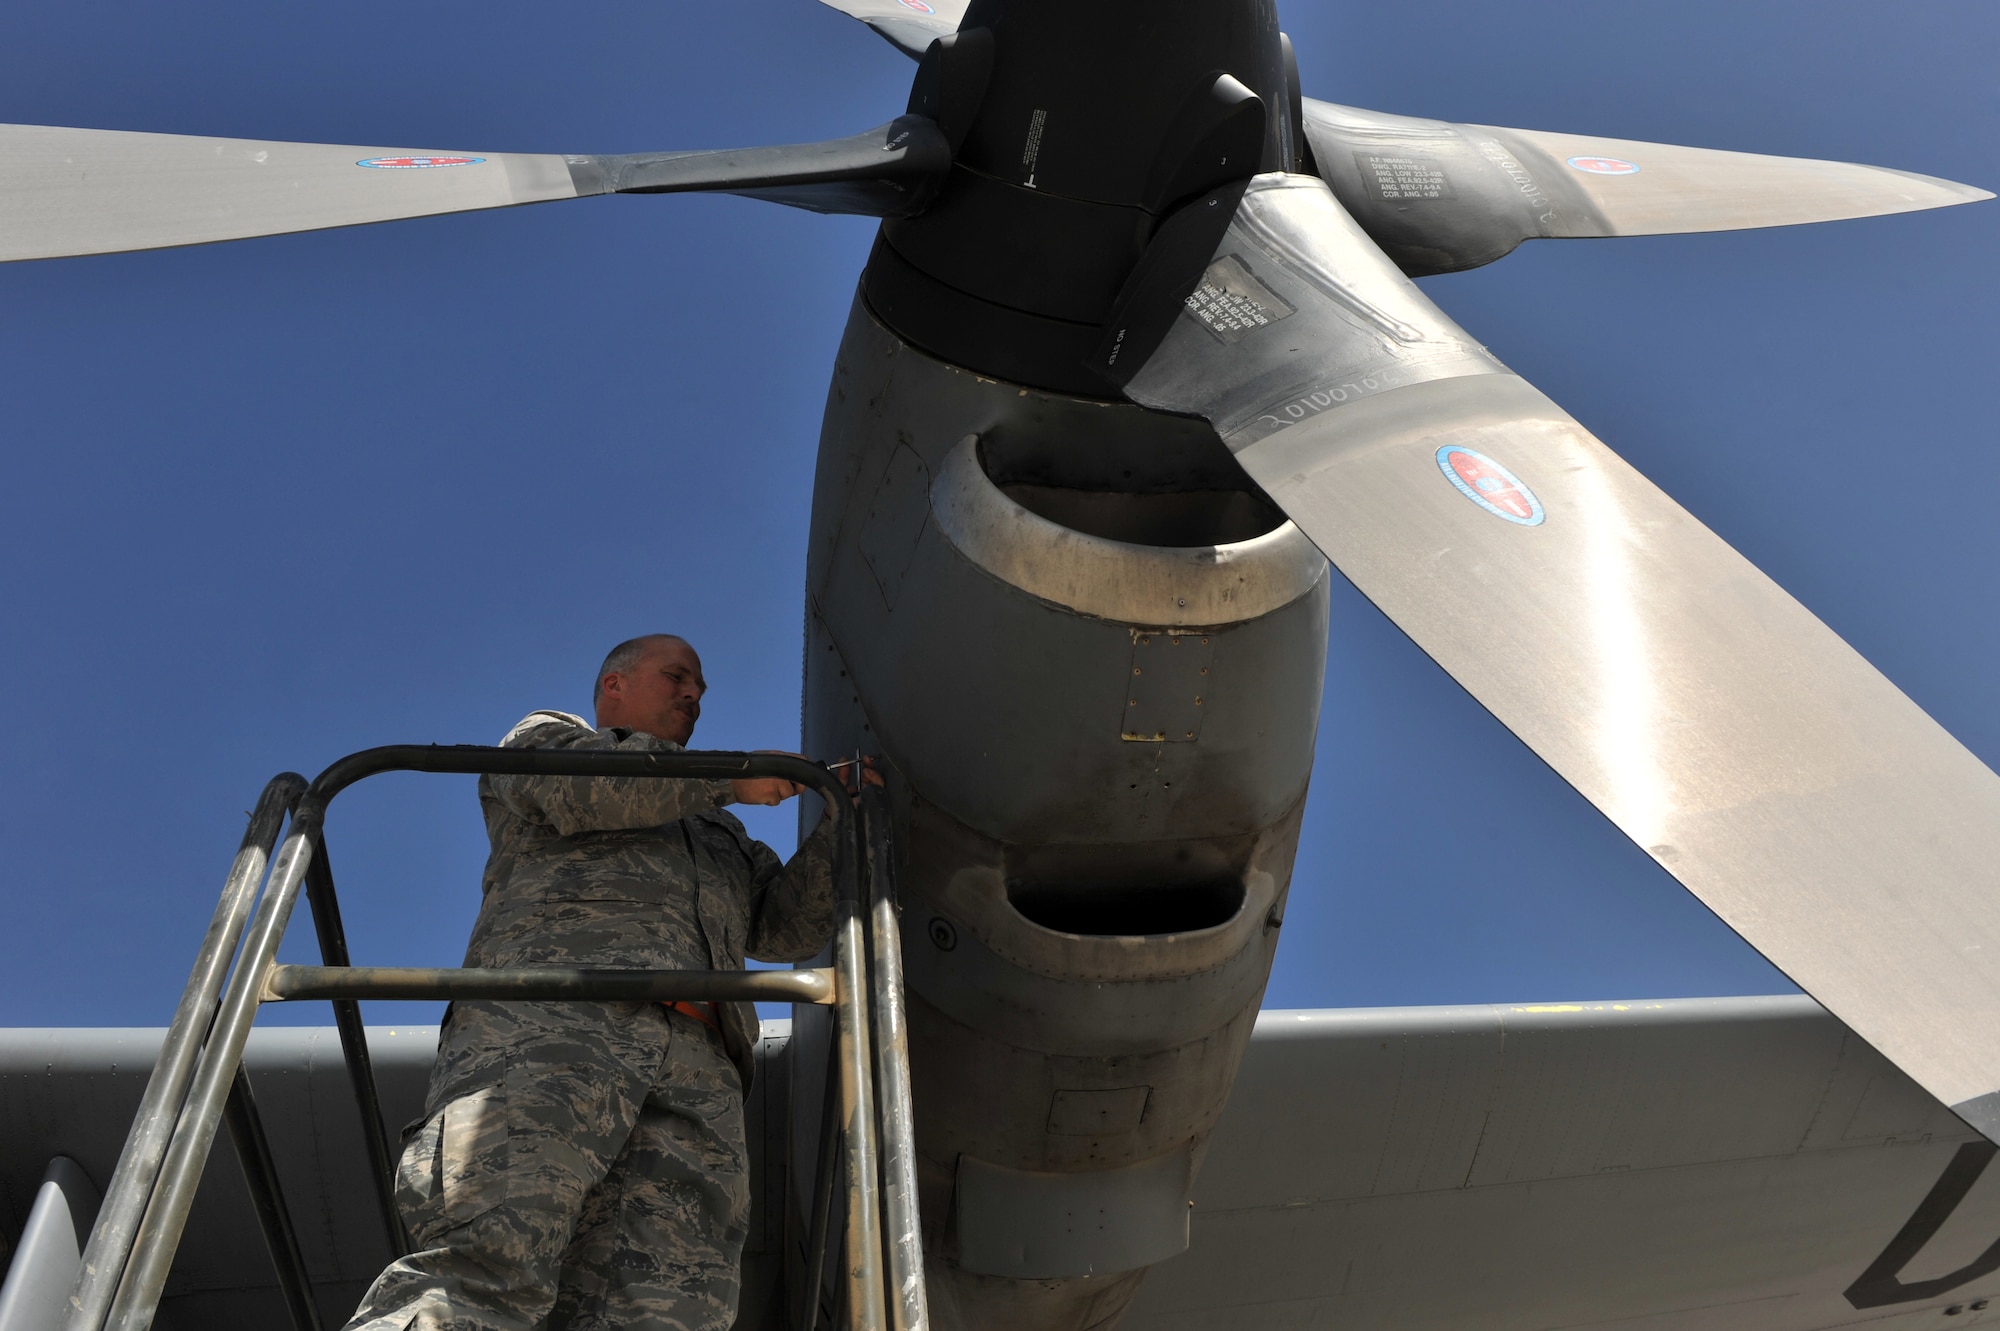 Tech. Sgt. Donald Debord, 455th Expeditionary Aircraft Maintenance Squadron crewchief, opens an engine cowling during a routine inspection on a C-130 Hercules at Bagram Airfield, Afghanistan, June 2, 2011. Sergeant Debord is deployed from the 166th Aircraft Maintenance Squadron, Delaware Air National Guard, Del., and is a native of New Castle, Del.  (U.S. Air Force photo by Senior Airman Sheila deVera)